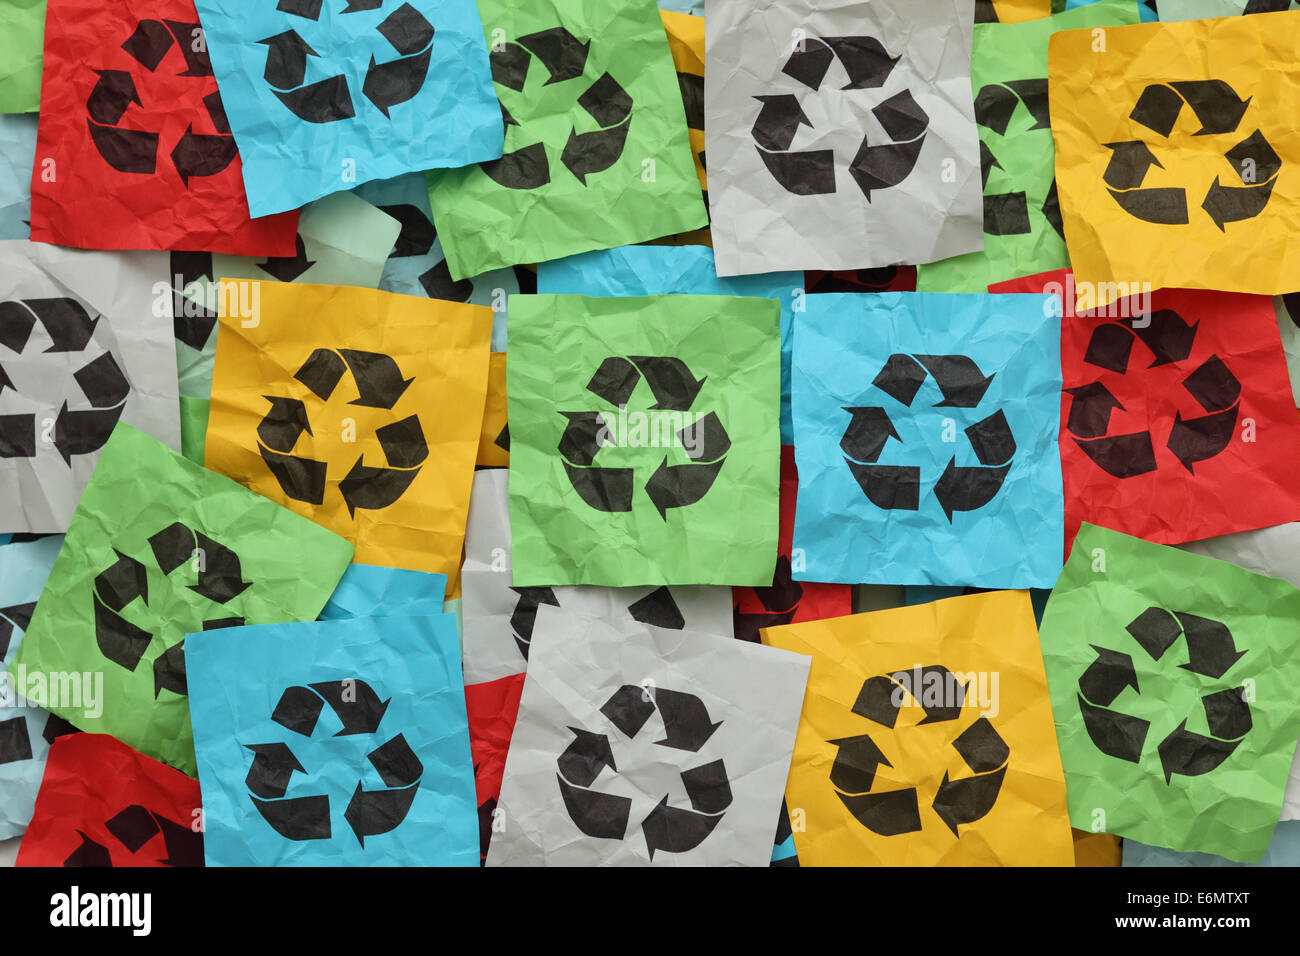 Colorful Clothes And Mini Hungers Under Paper Cut Recycling Symbol